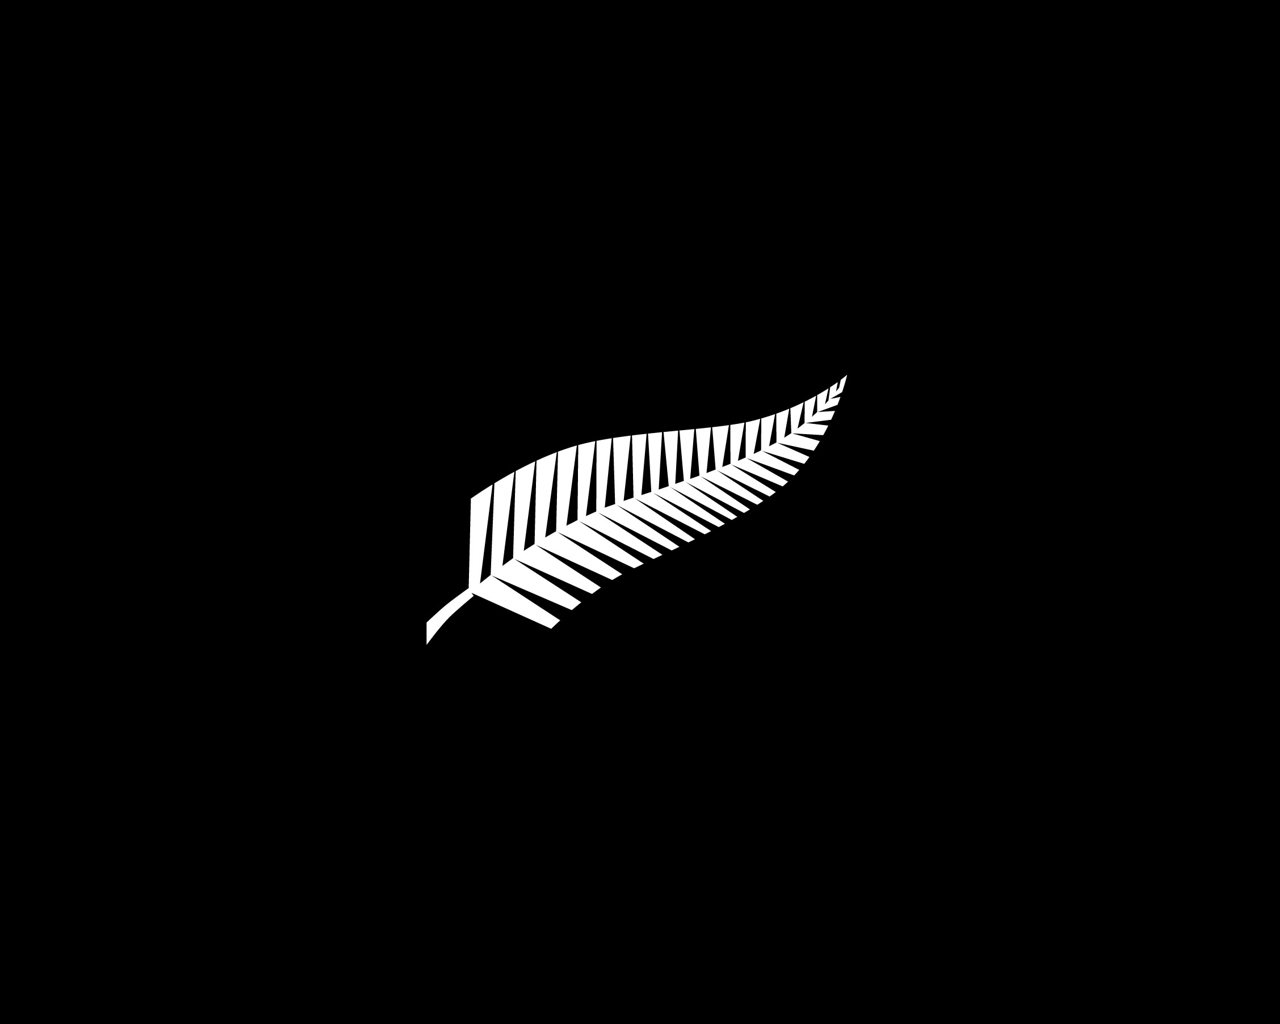 All Blacks Wallpaper by AbdielSeraph on